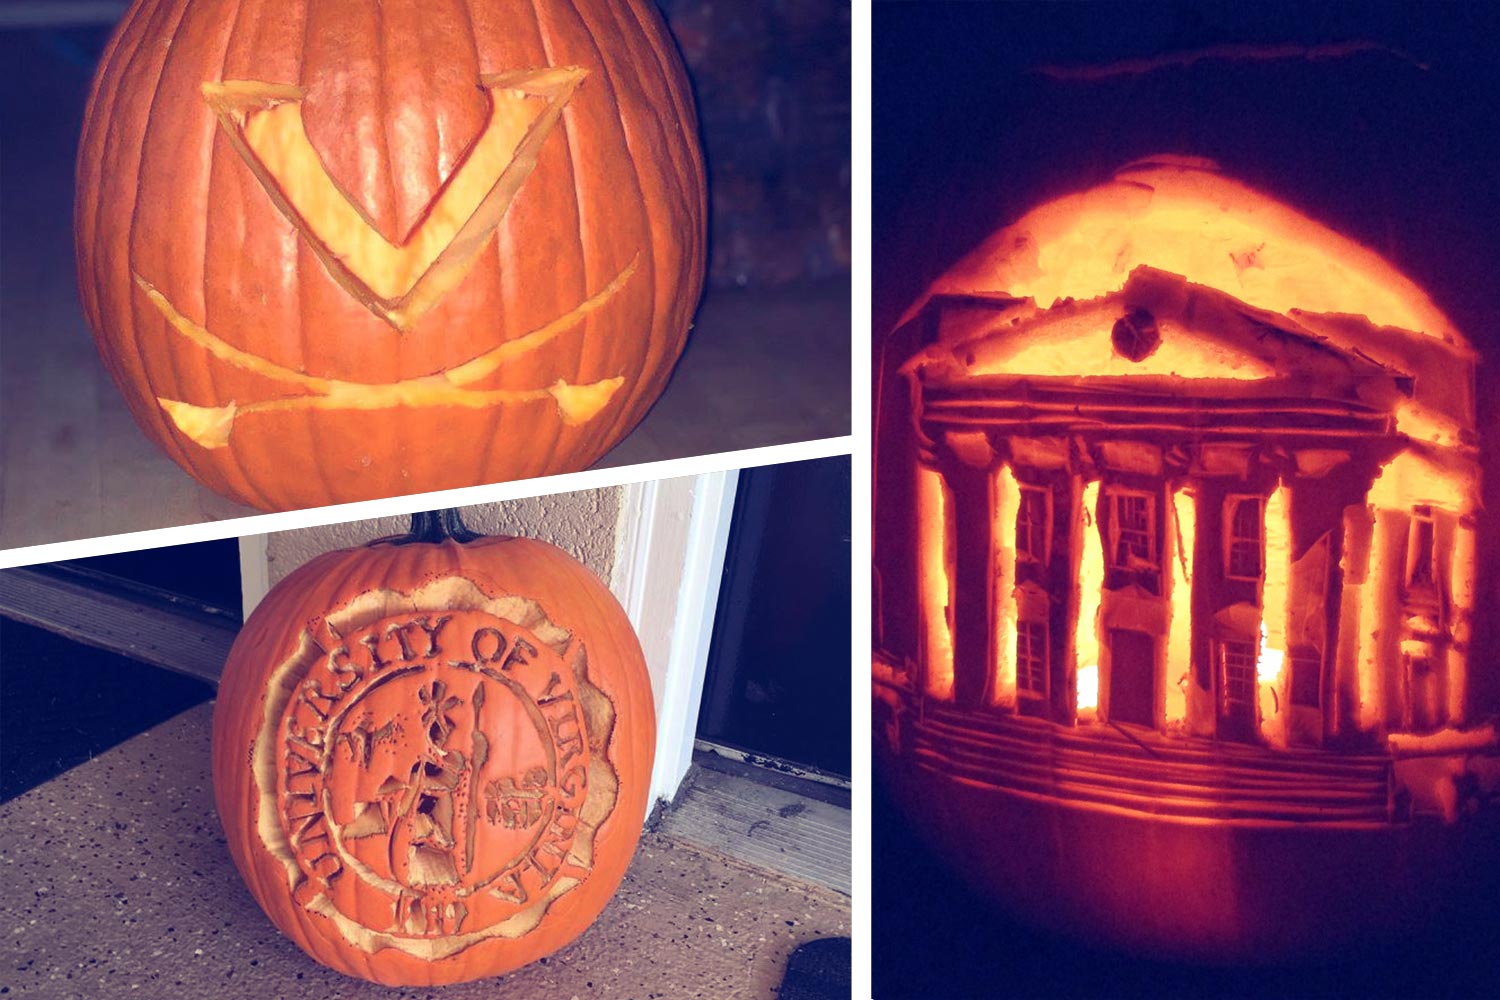 Top left: Pumpkin with V saber, Bottom Left: UVA Seal carved into a pumpkin, Right: the Rotunda carved into a pumpkin